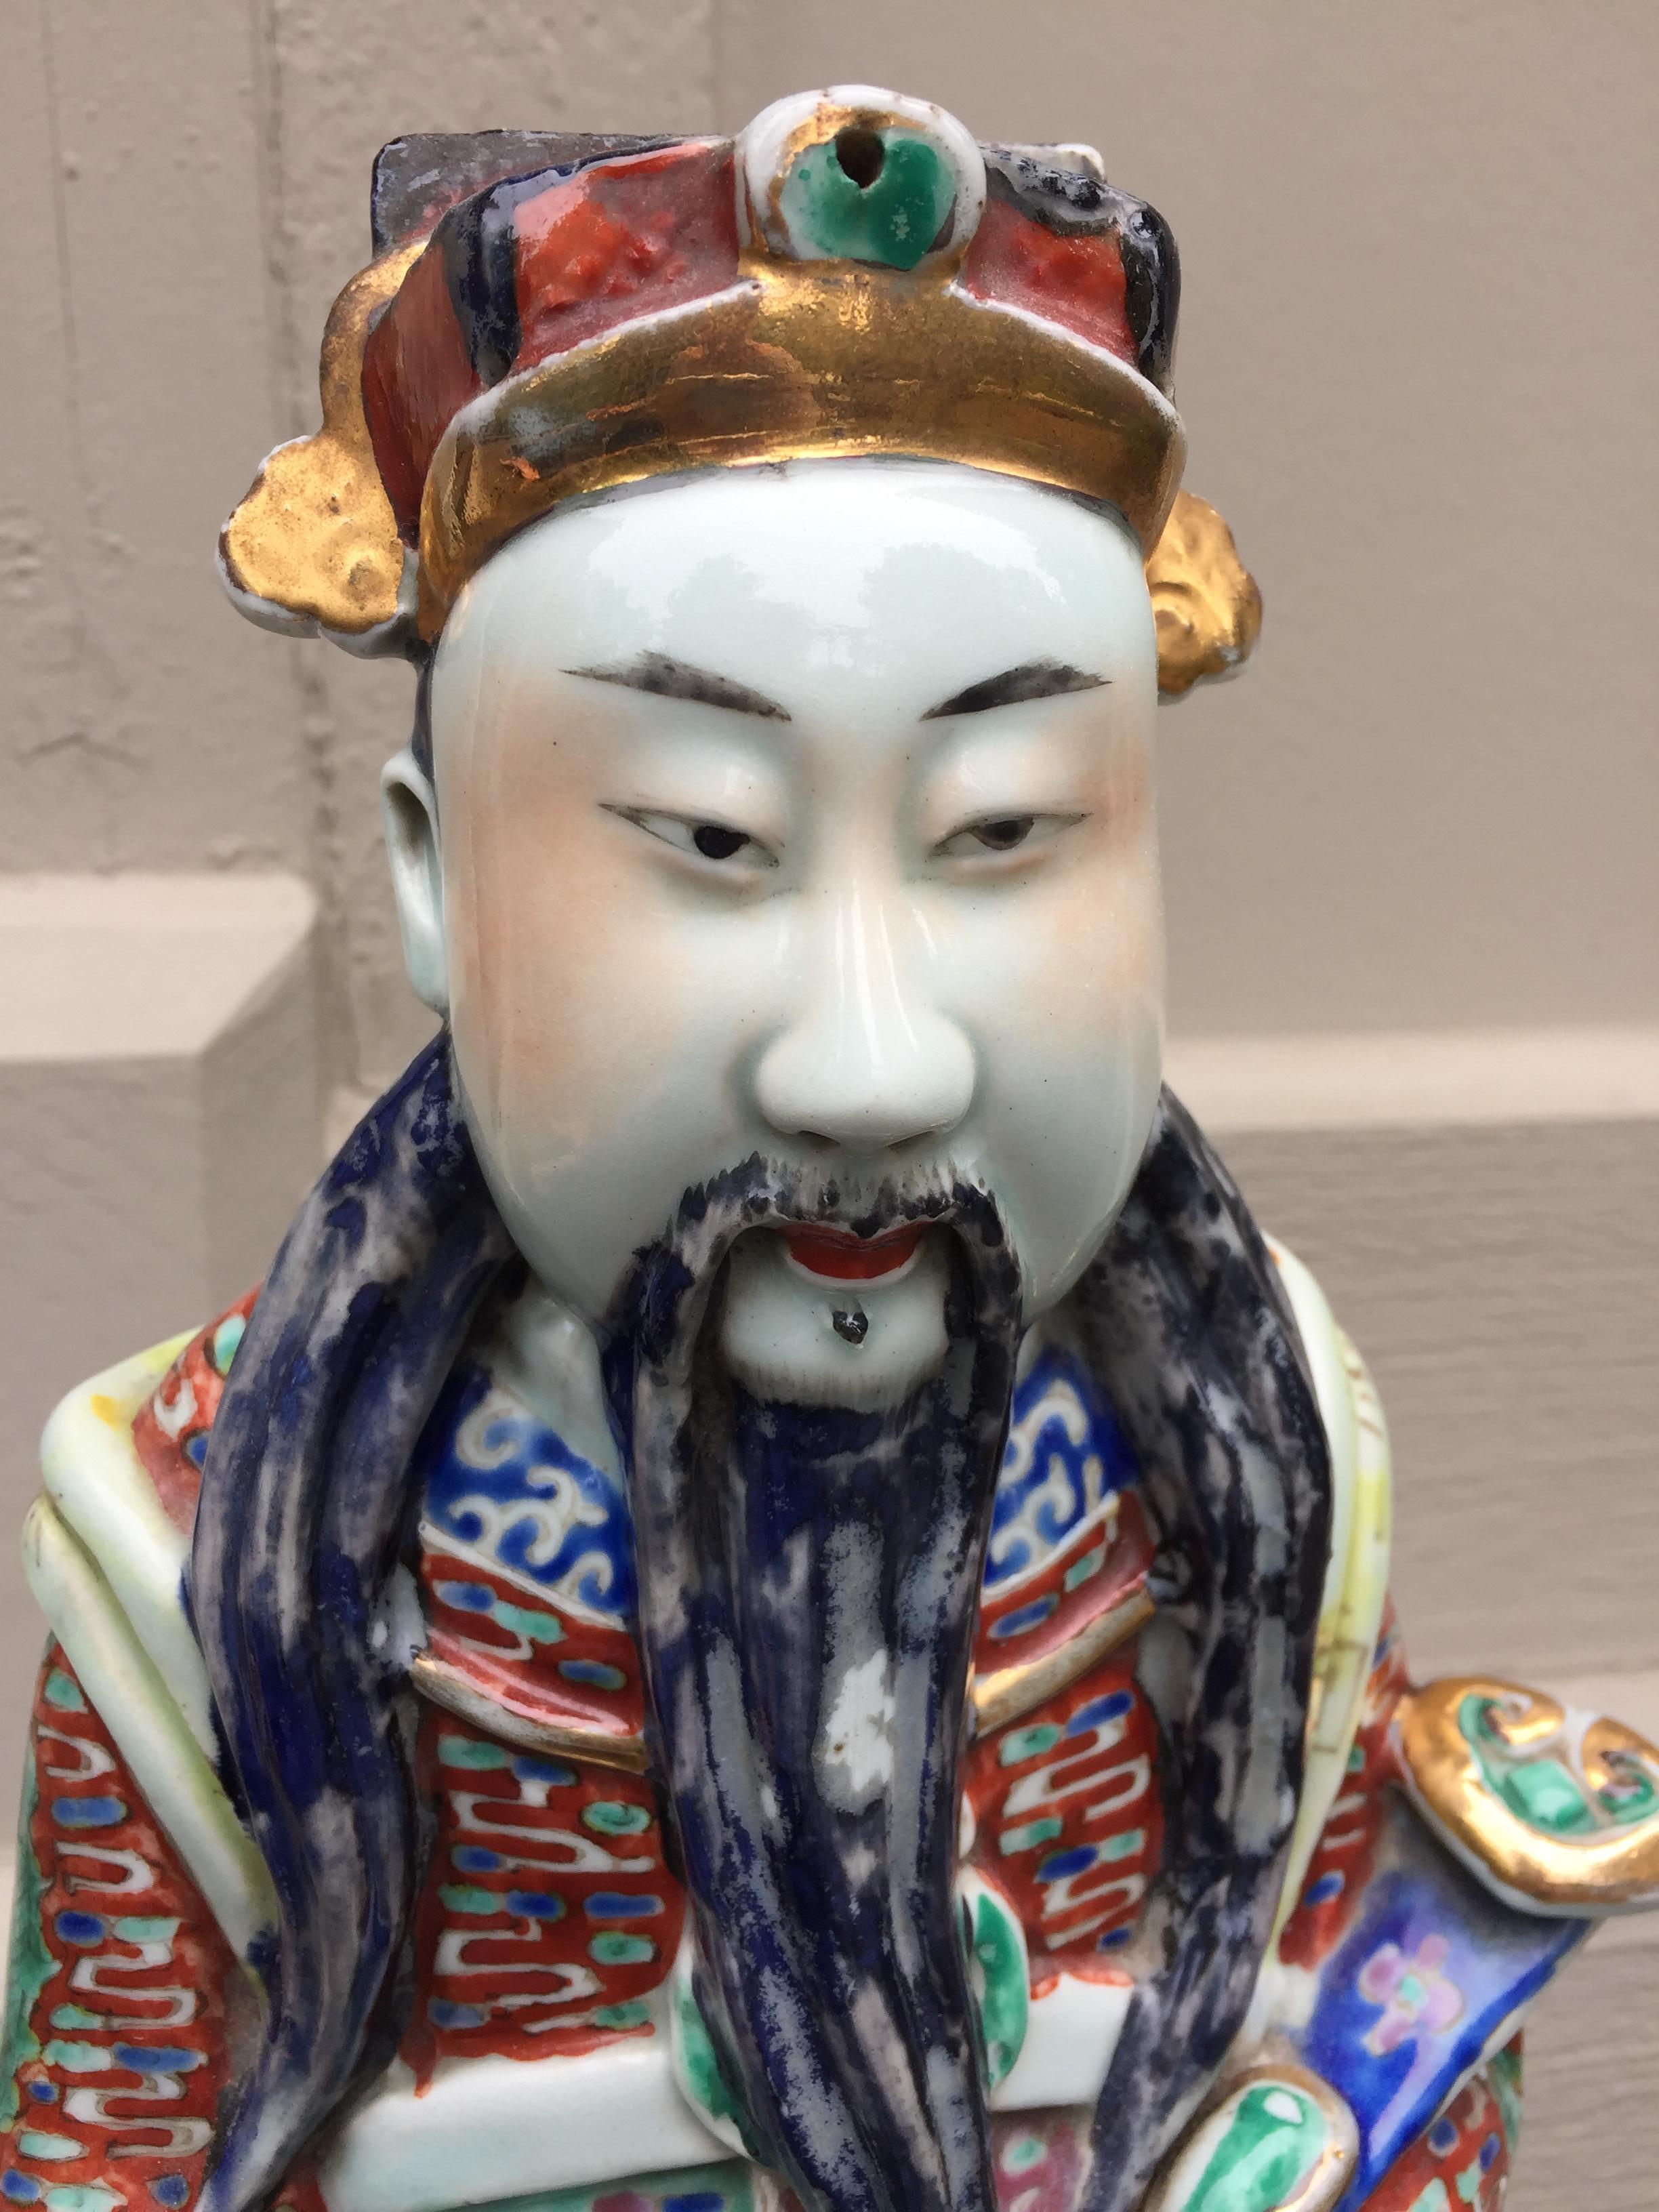 Asian antique porcelain and gold leaf immortal statue
Chinese famille rose porcelain immortal one of the Gods of longevity, prosperity and happiness,
circa 1920s-1930s, early 20th century
This gold leaf and porcelain figure will enhance any room.